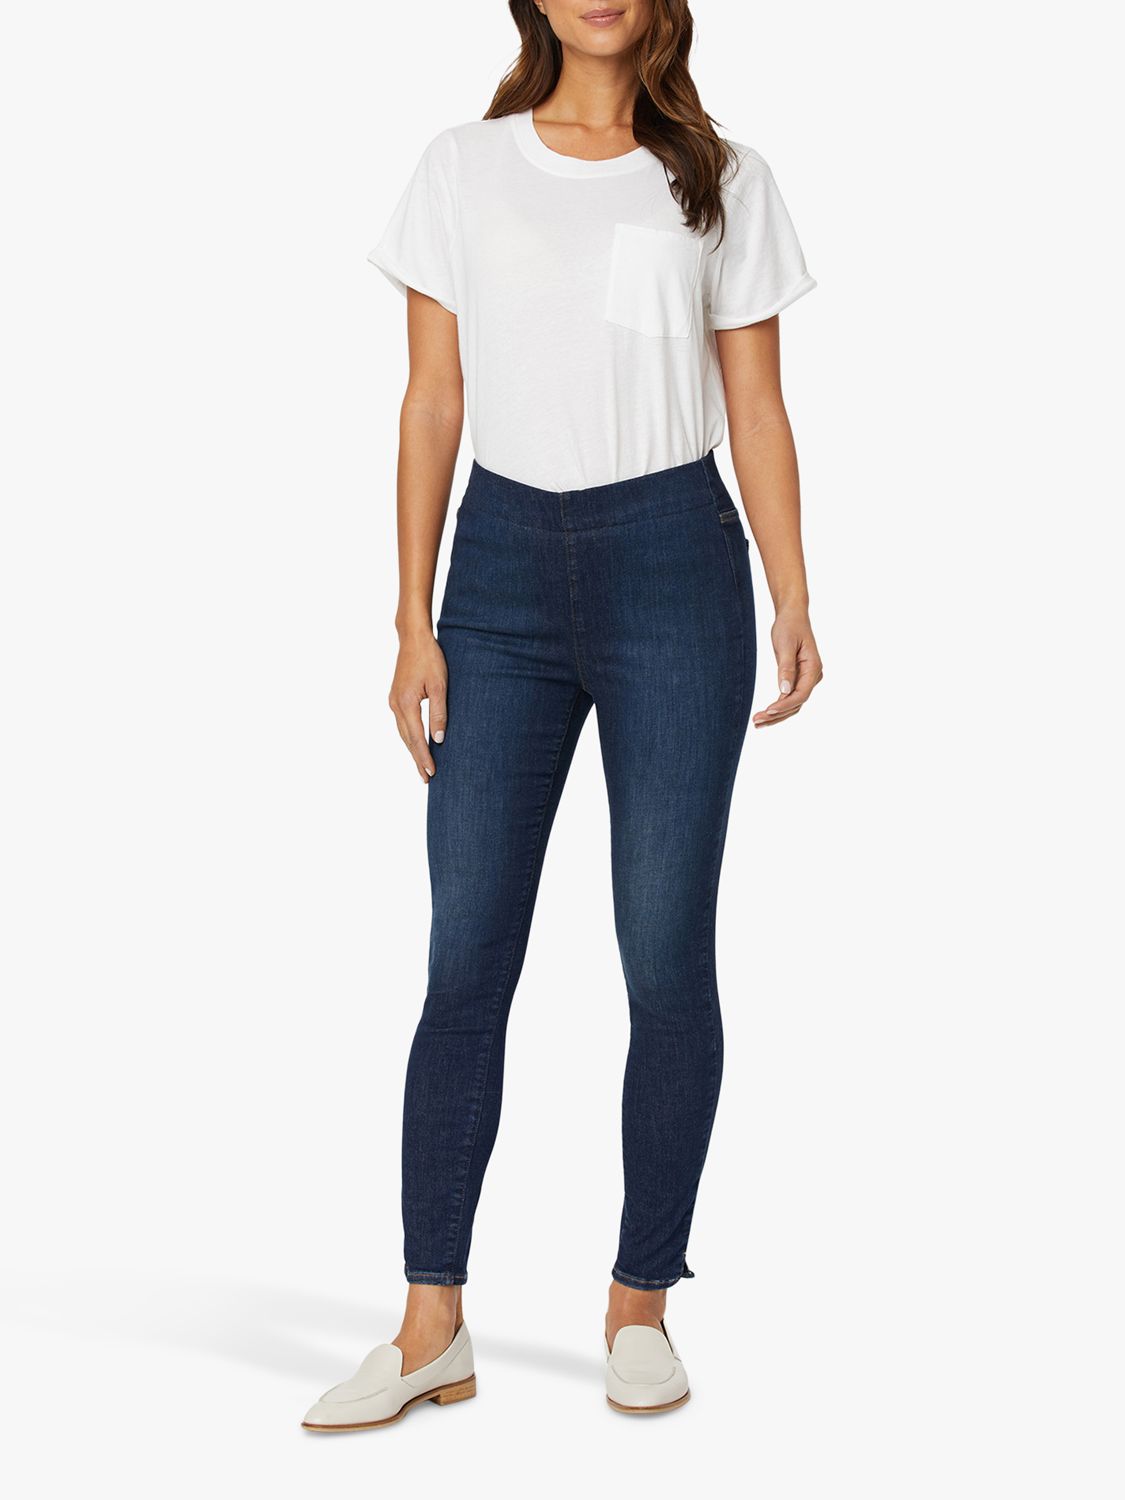 NYDJ Spanspring Pull On Jeans, Clean Vista, S